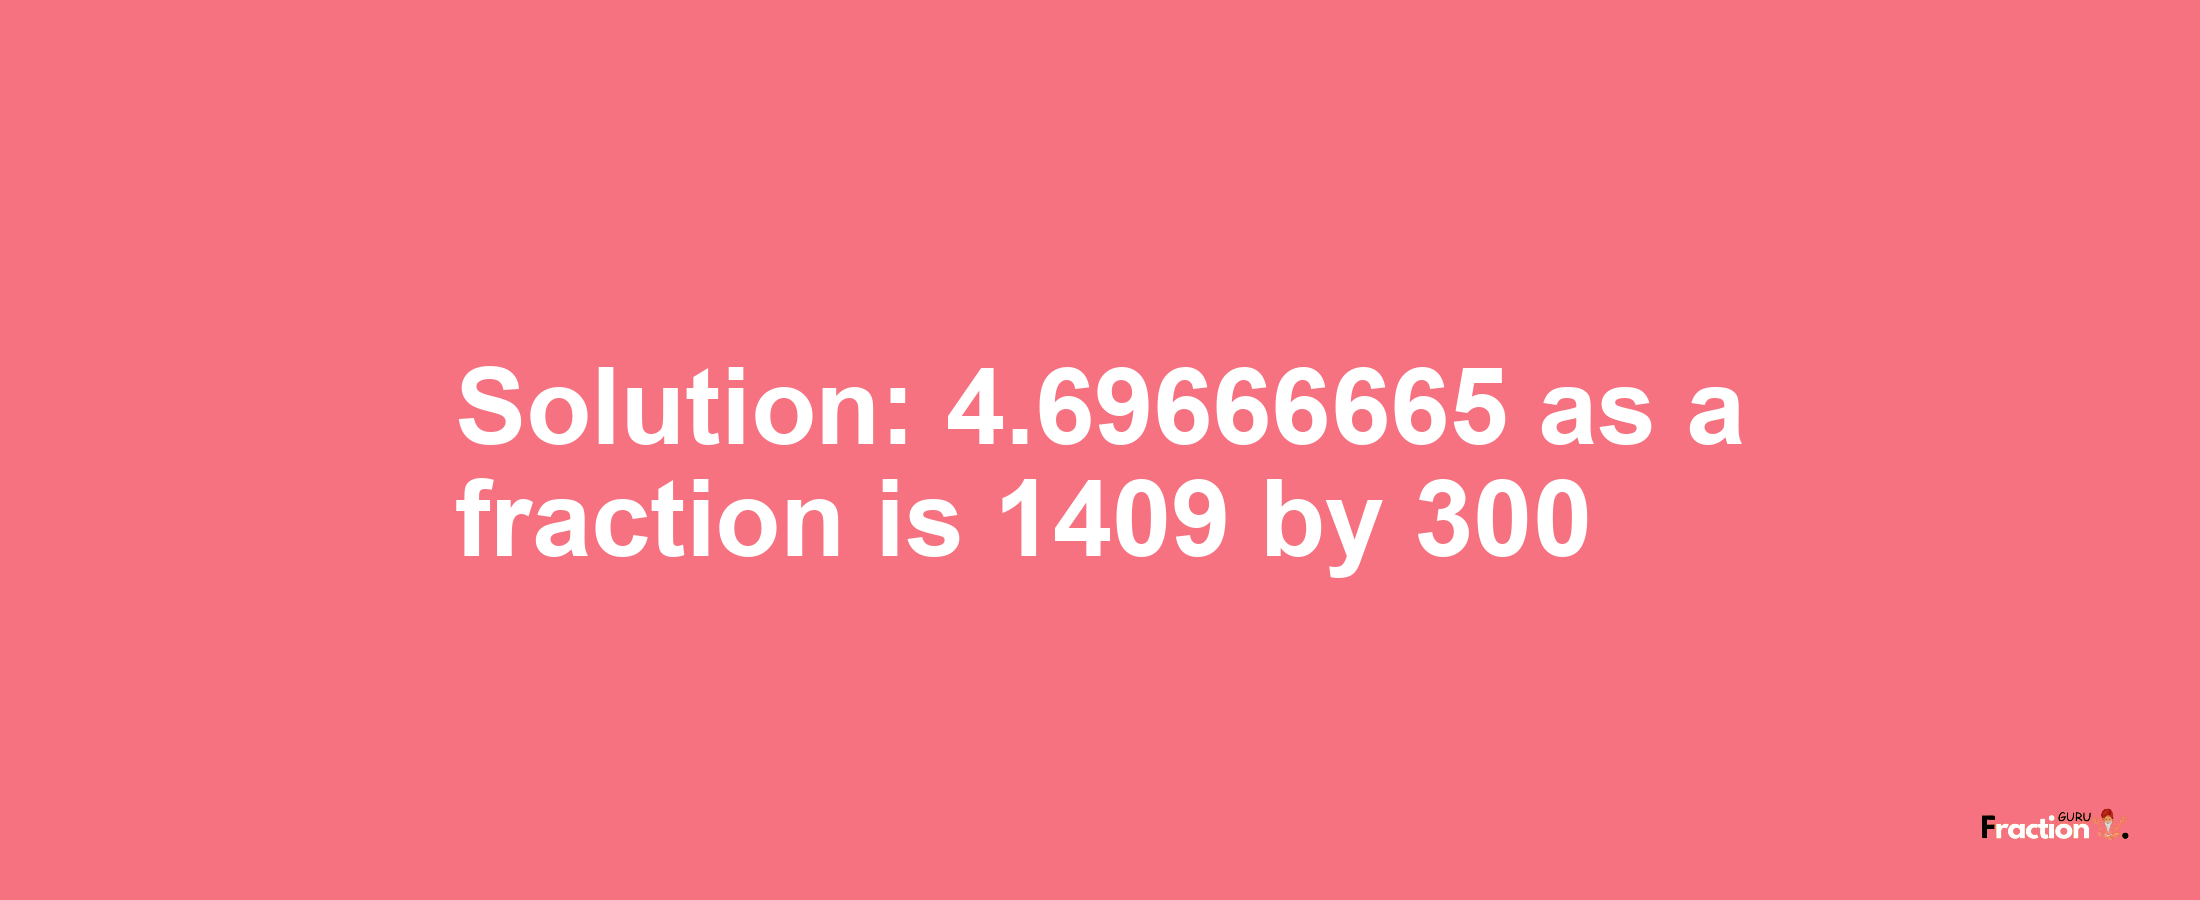 Solution:4.69666665 as a fraction is 1409/300